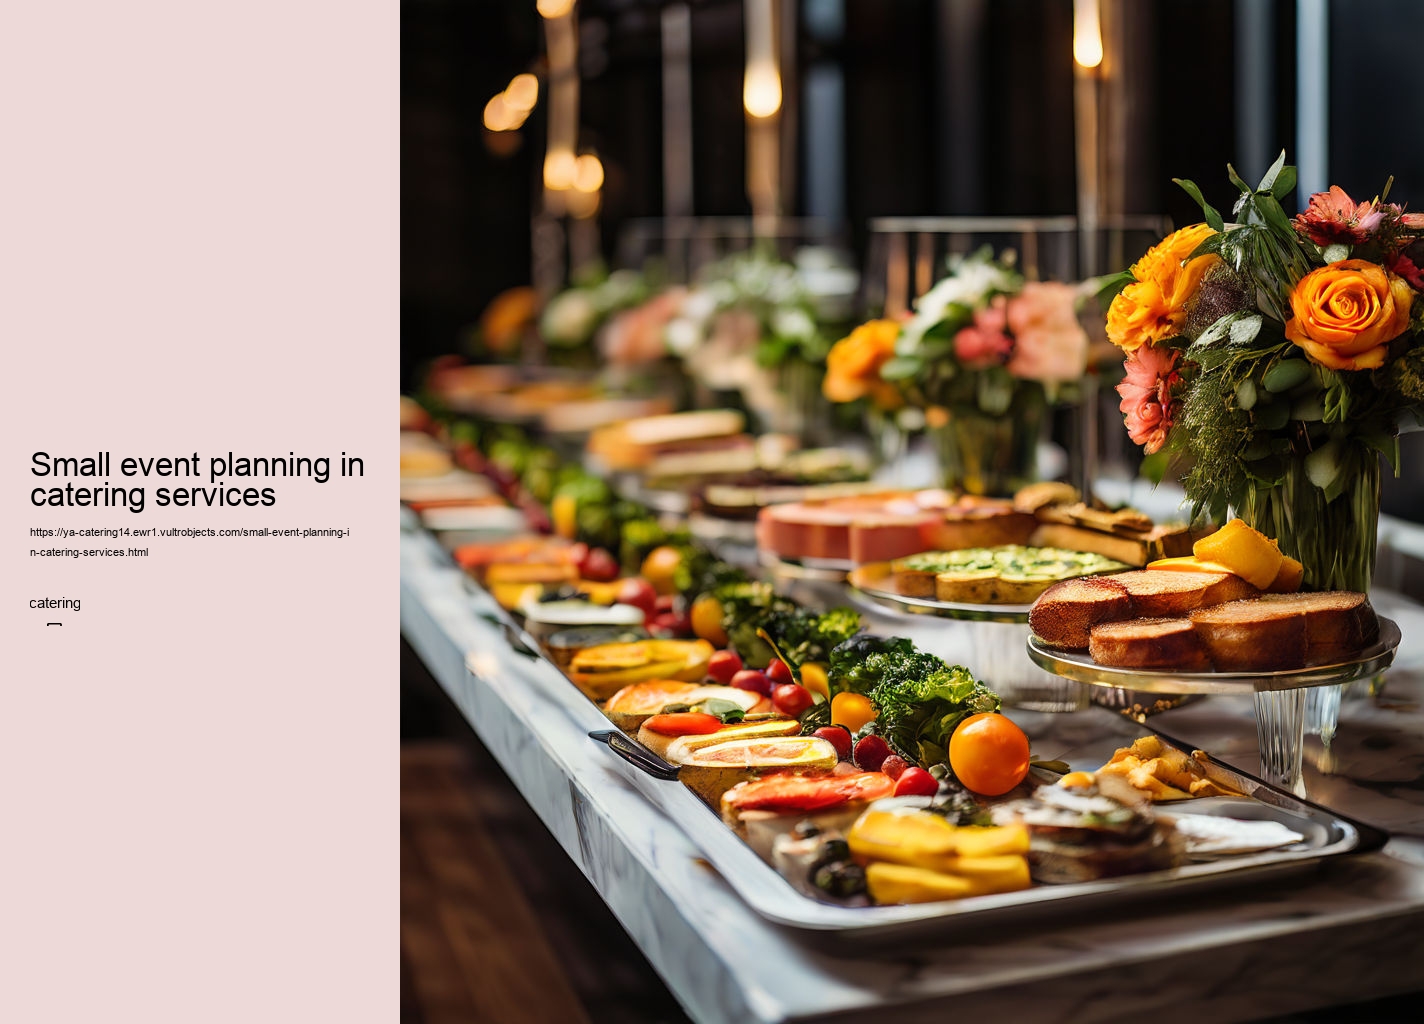 Small event planning in catering services